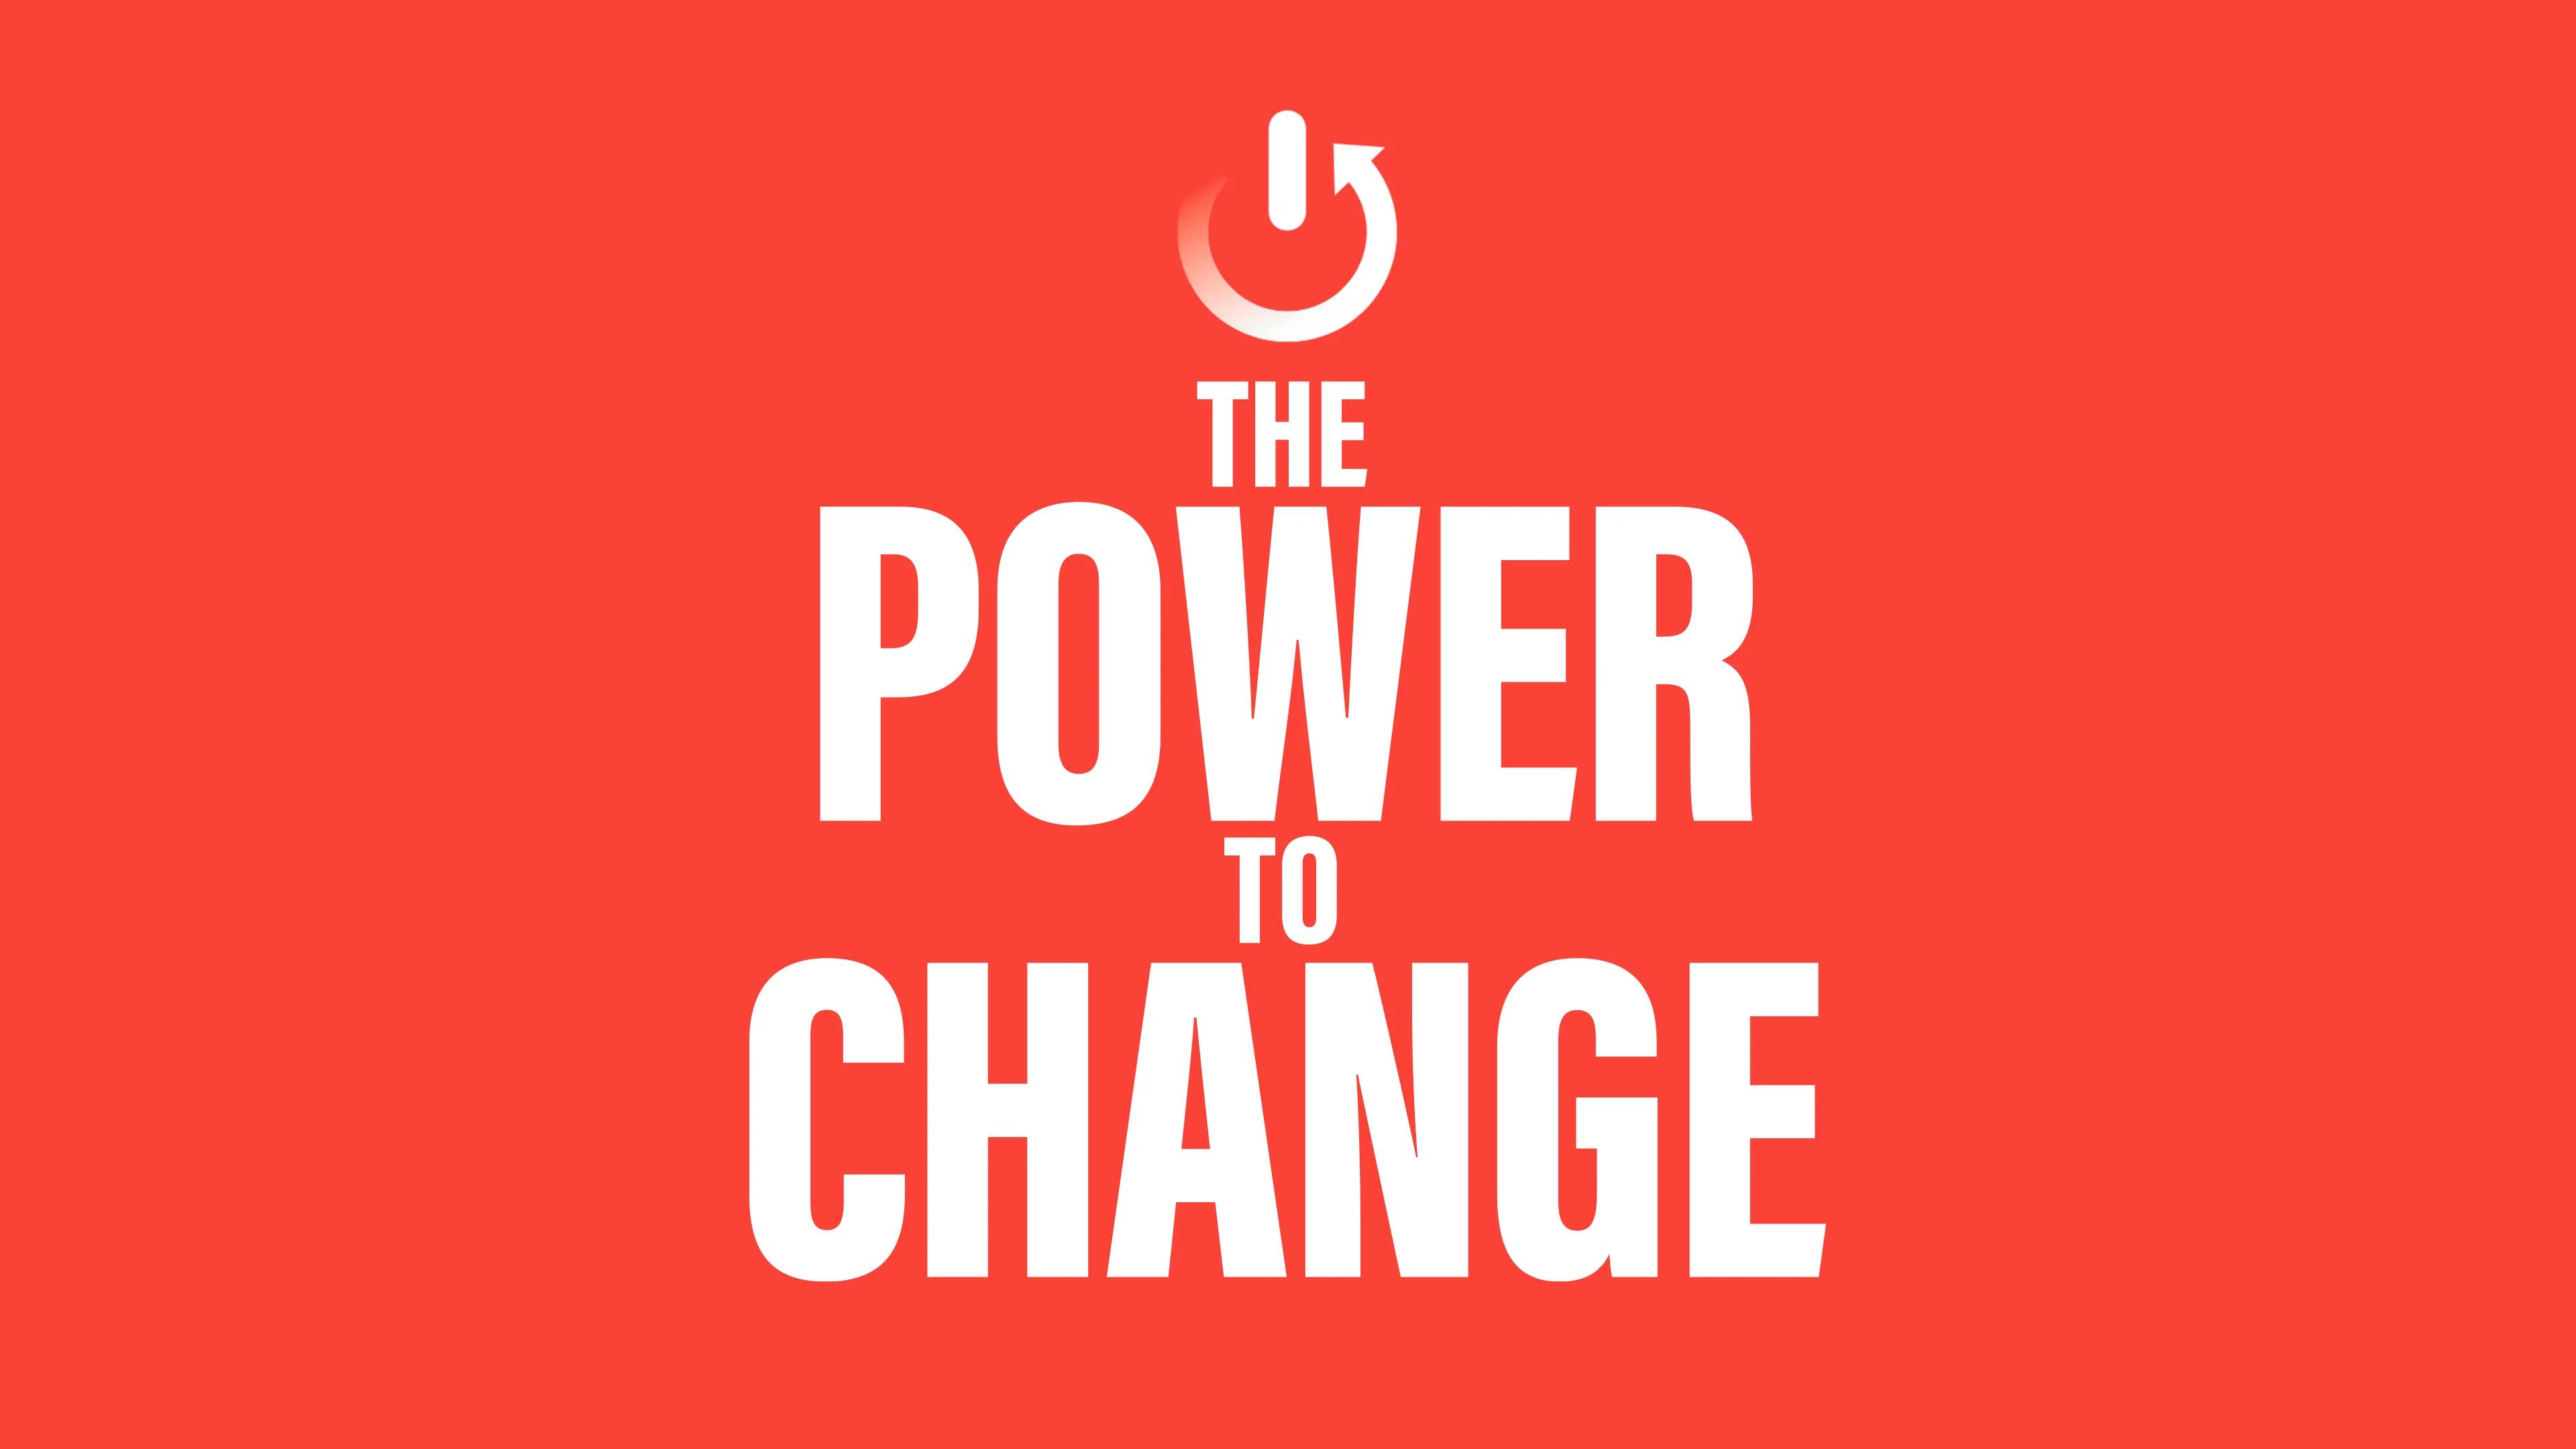 A red image with "The power to change" written on it.